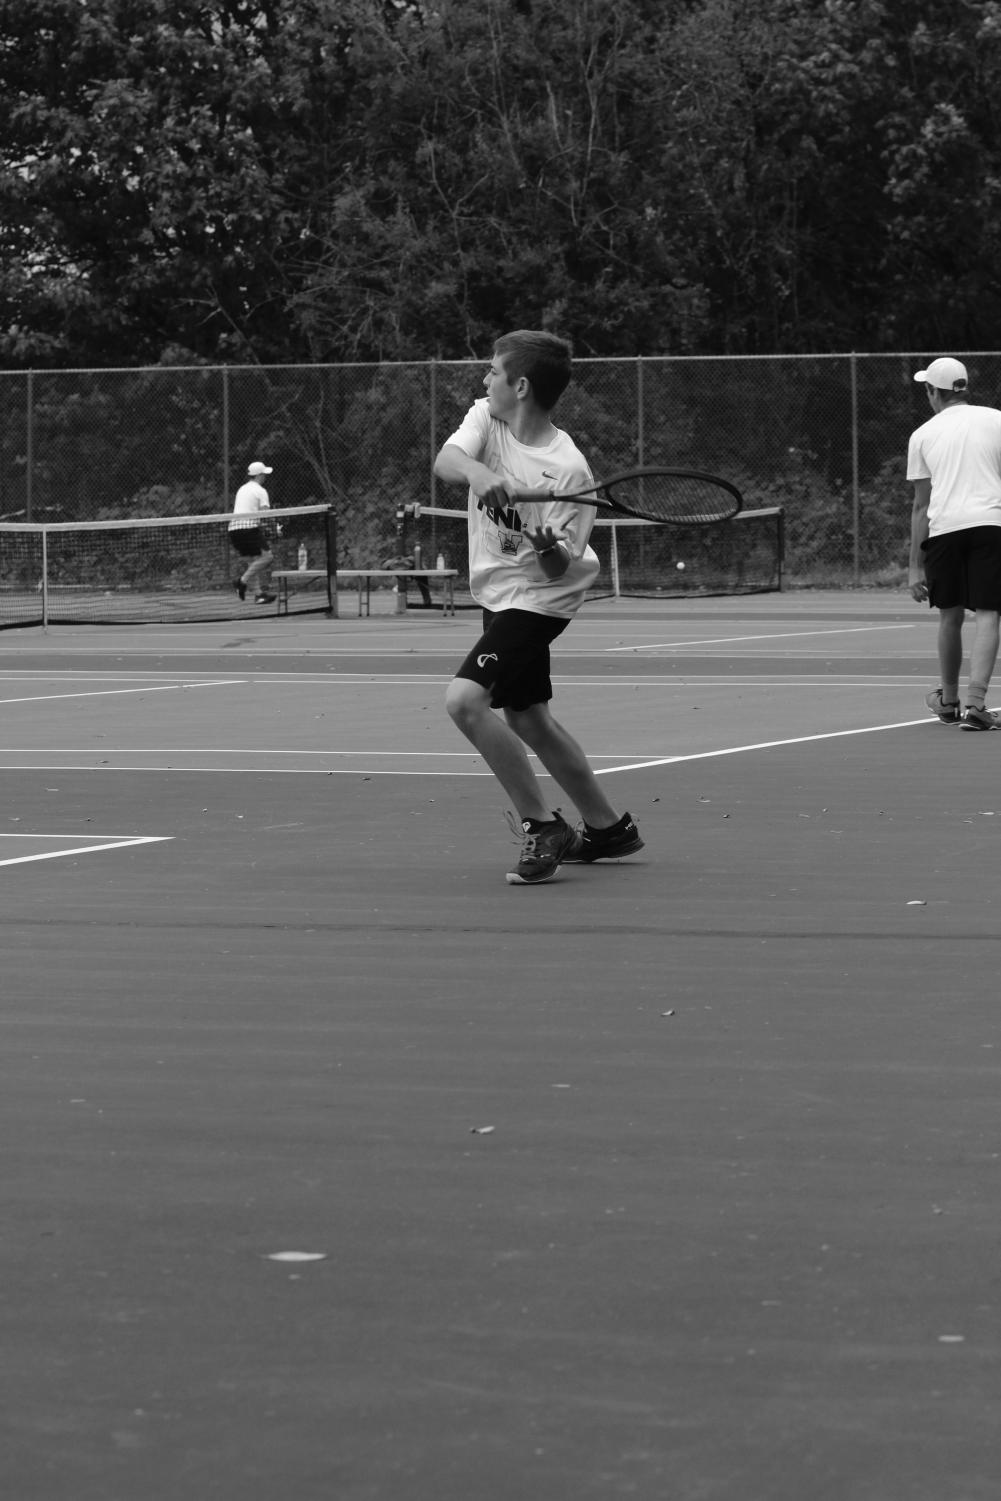 Adam+Walter+practices+his+swing+before+a+match+against+Issaquah+on+Oct.+3.+Photo+by+Priya+Annapureddy